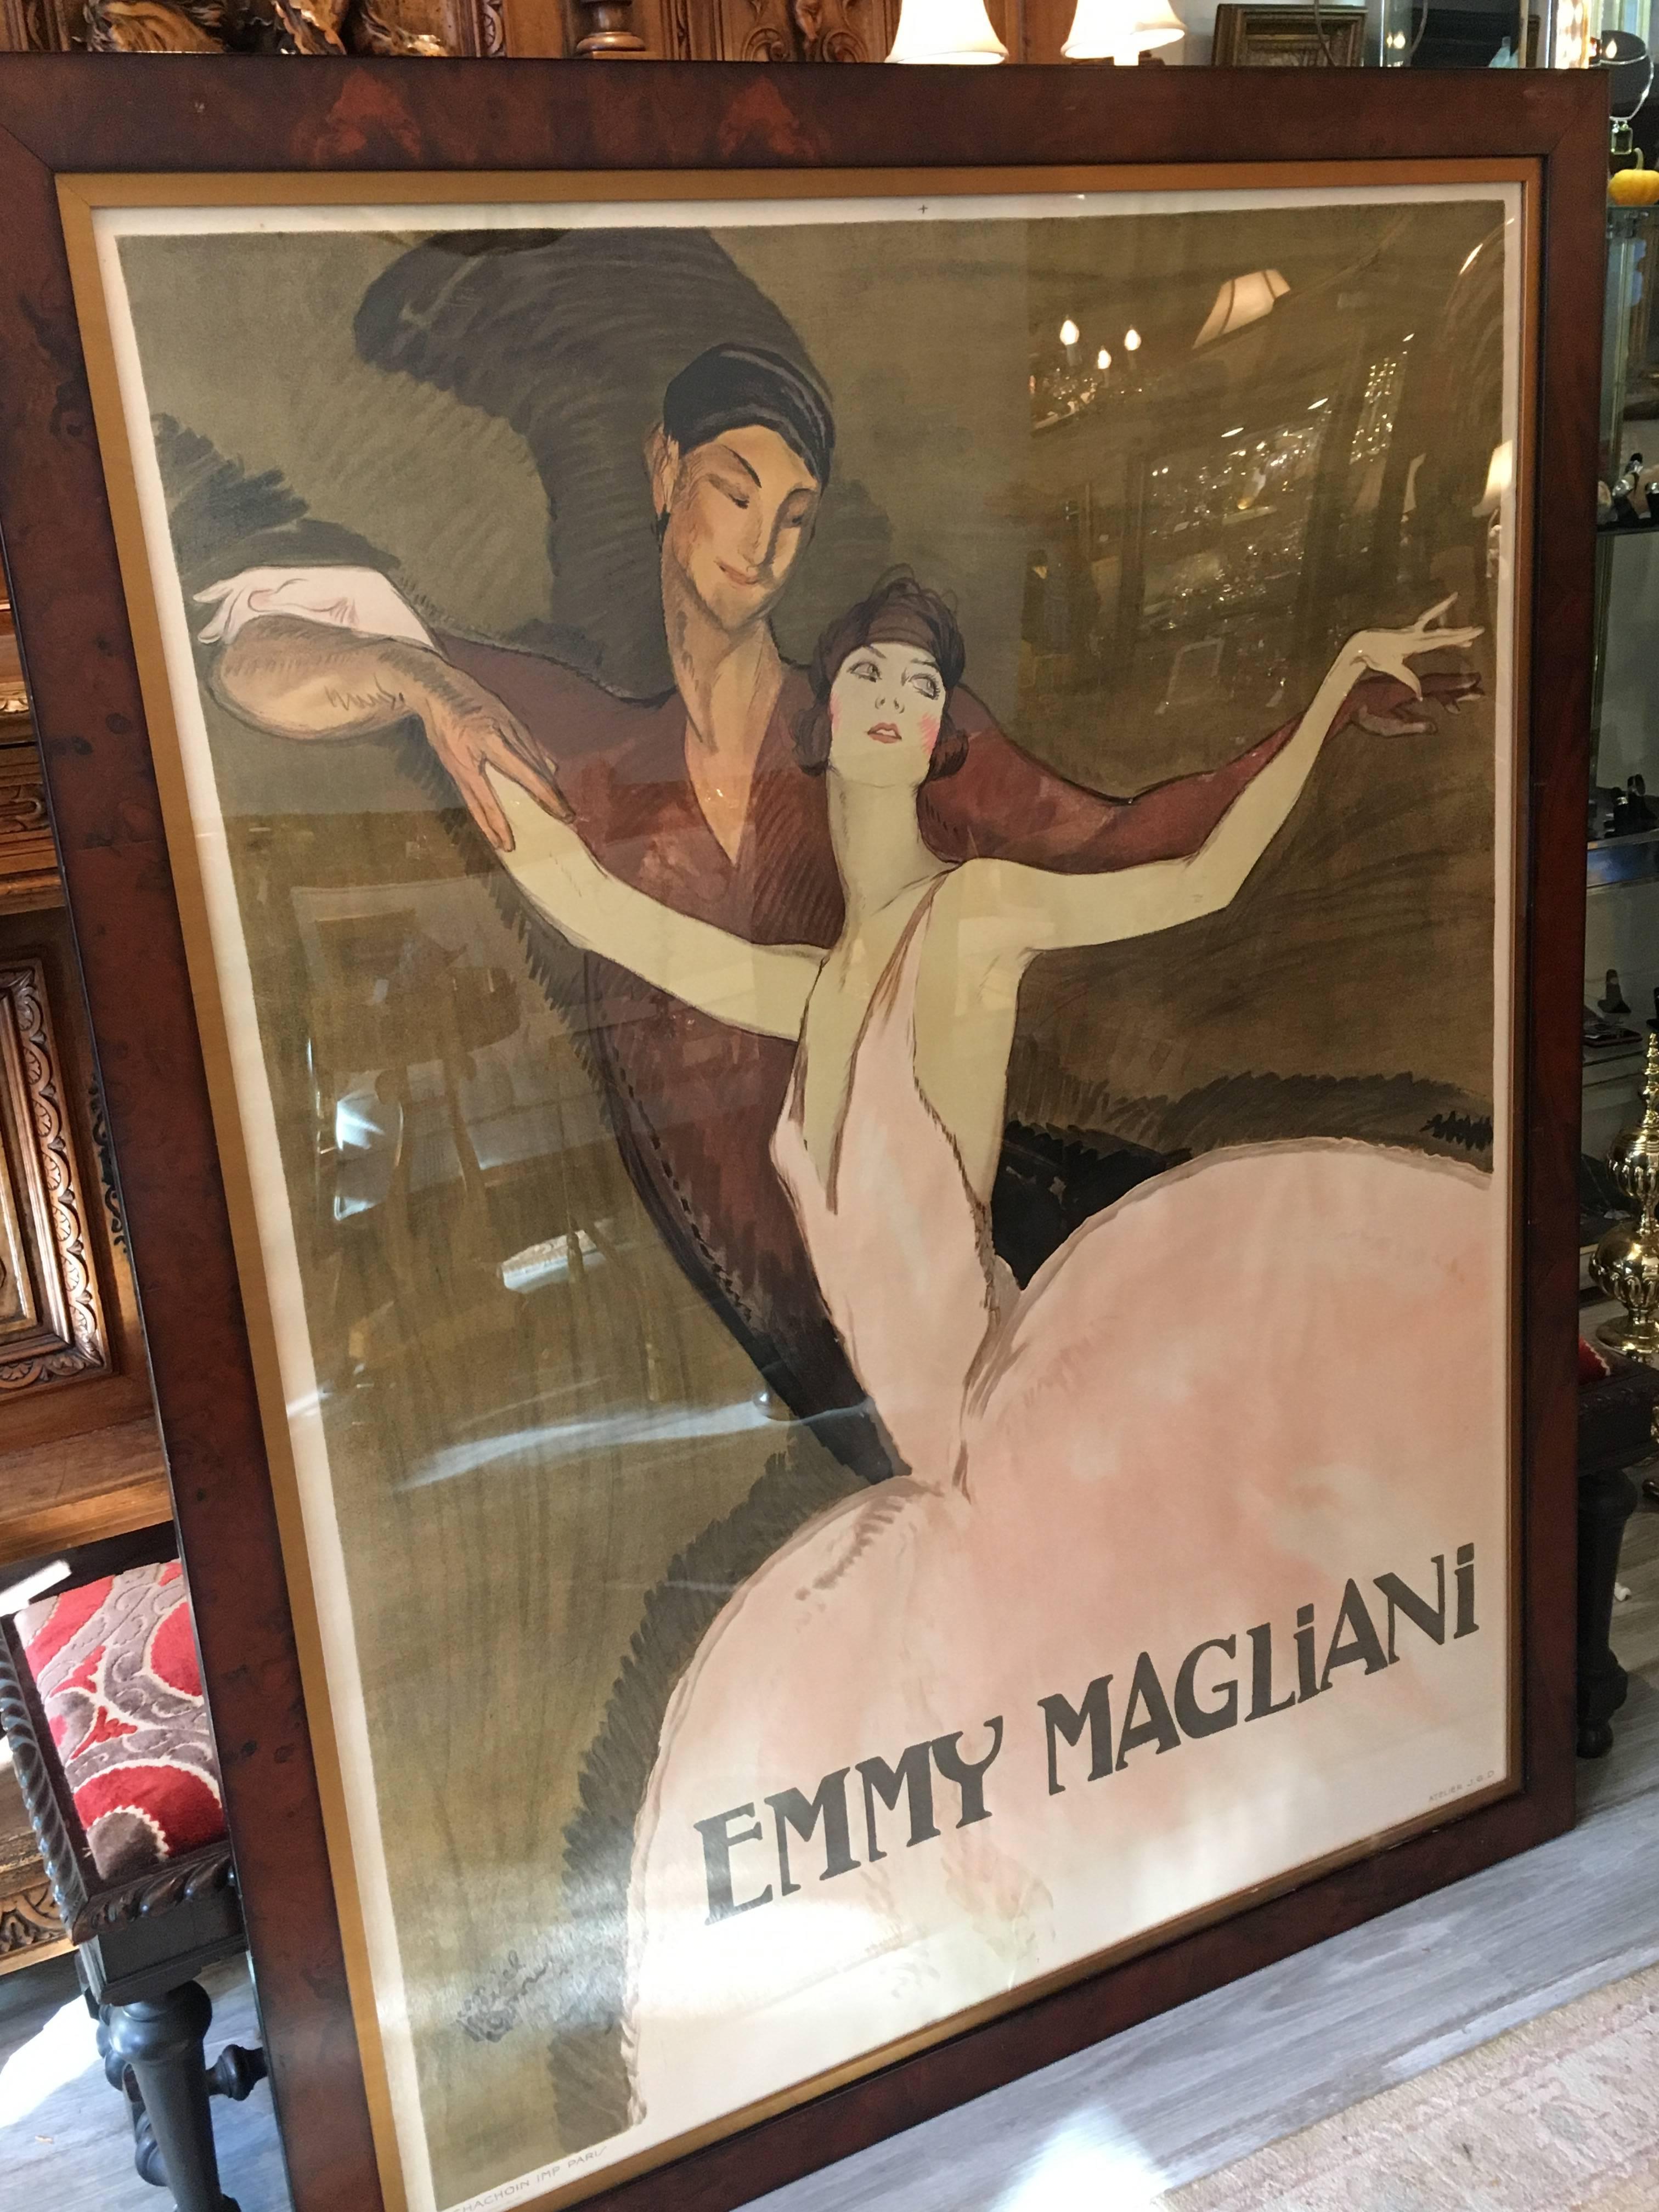 Stunning vintage French poster by Jean-Gabriel Domergue, a leading poster artist in the 1920s and 1930s. Mounted on linen, ballerina Emmy Magliani is captured in a flowing pose. His elongated figures and pencil thin heroines were his signature.